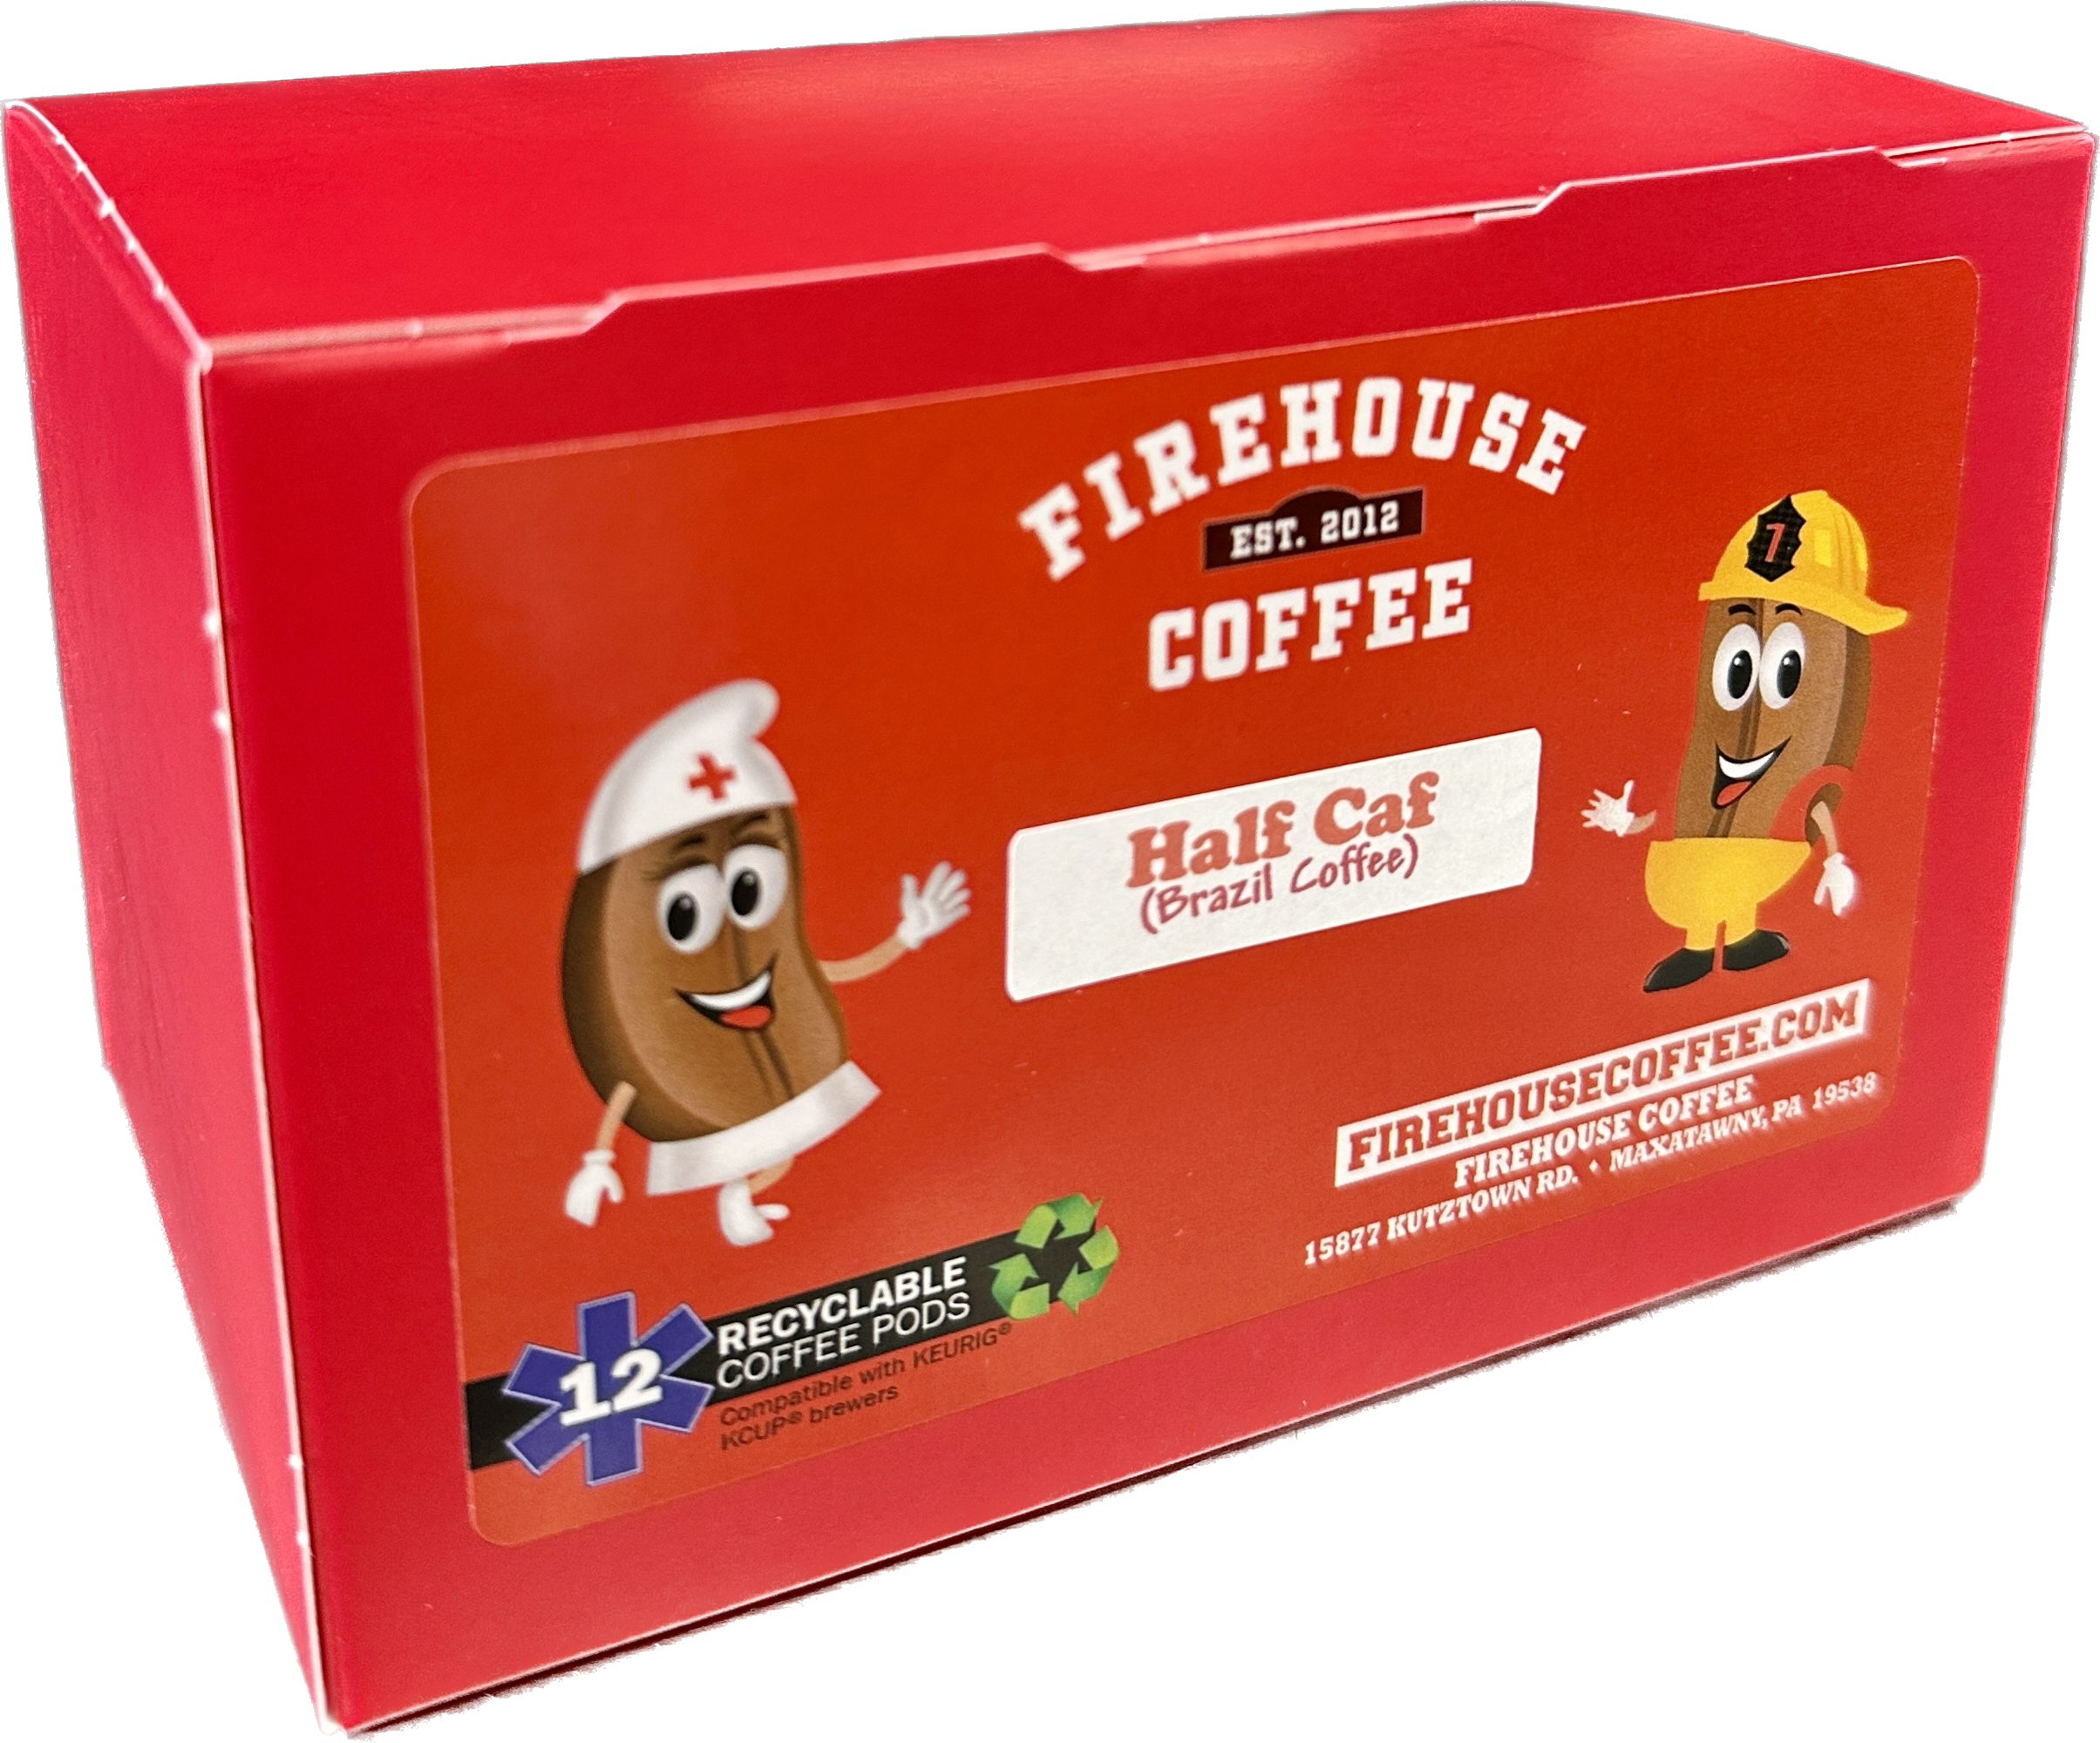 Half-Caff is our 50/50 blend of Medium Roasted Brazil and Decaffeinated Dark Roast Brazil Coffee 12ct KCups